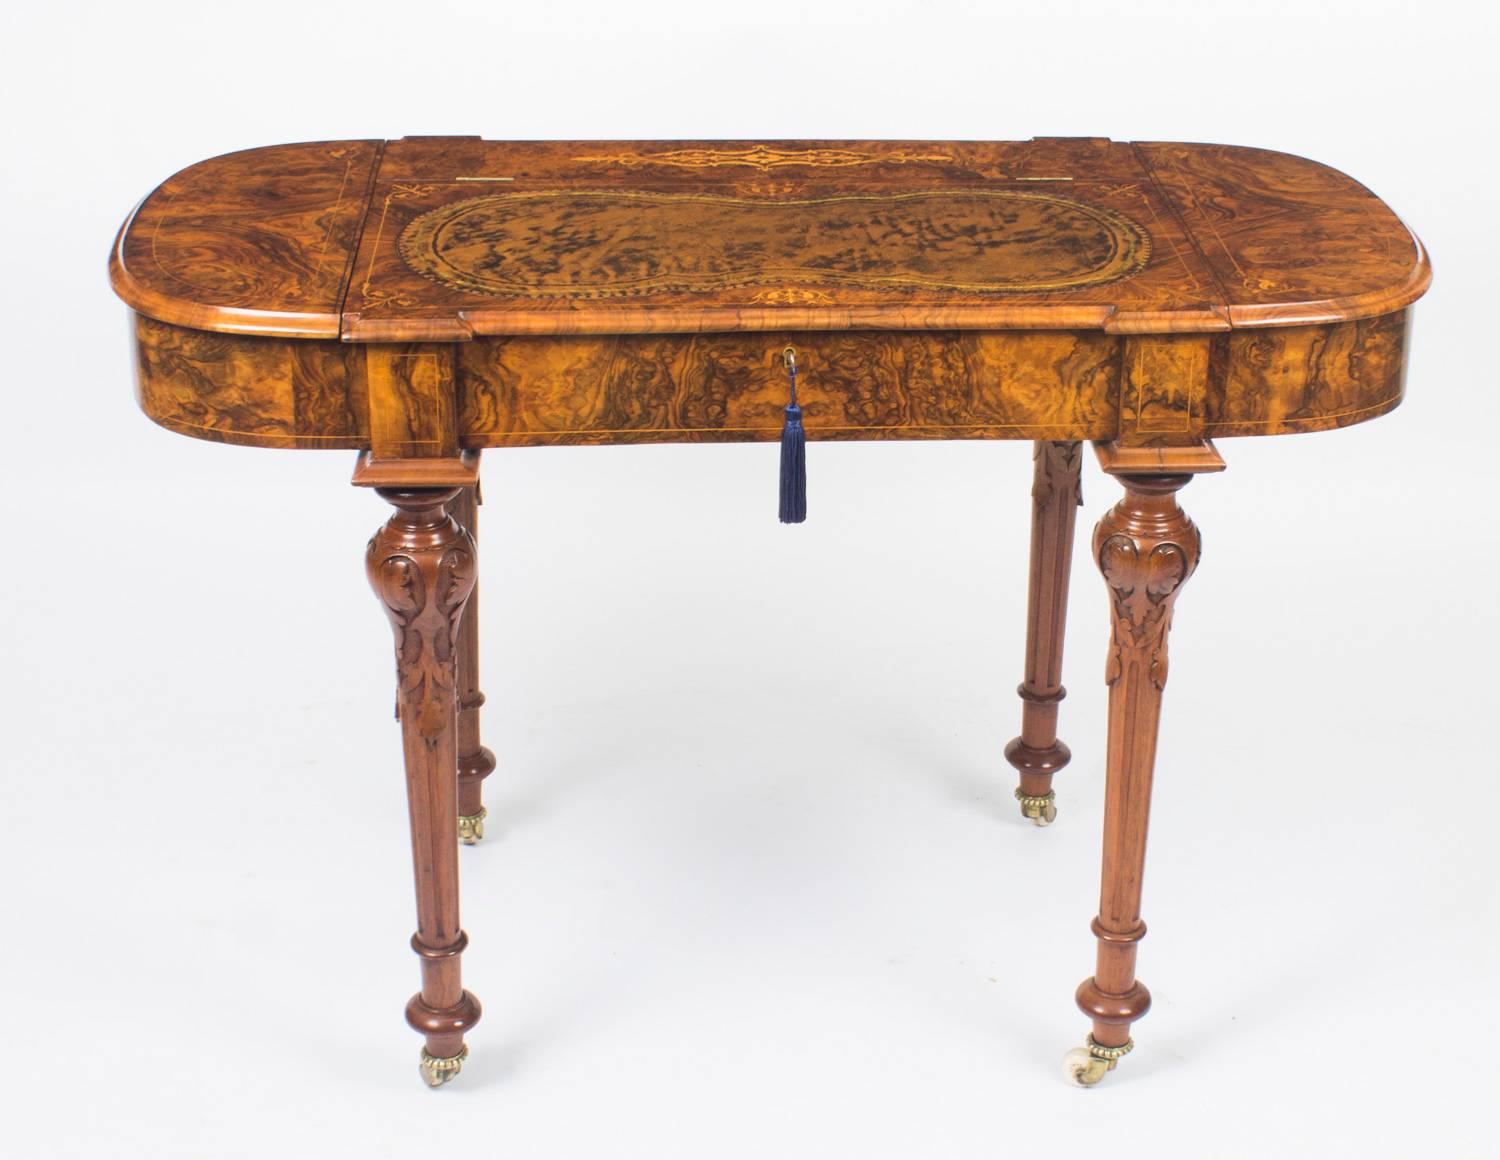 An elegant antique English Victorian burr walnut and marquetry writing desk, circa 1870 in date.

The top features delicate foliate marquetry with a shaped chocolate brown gold tooled leather inset, which lifts up to reveal a large space for